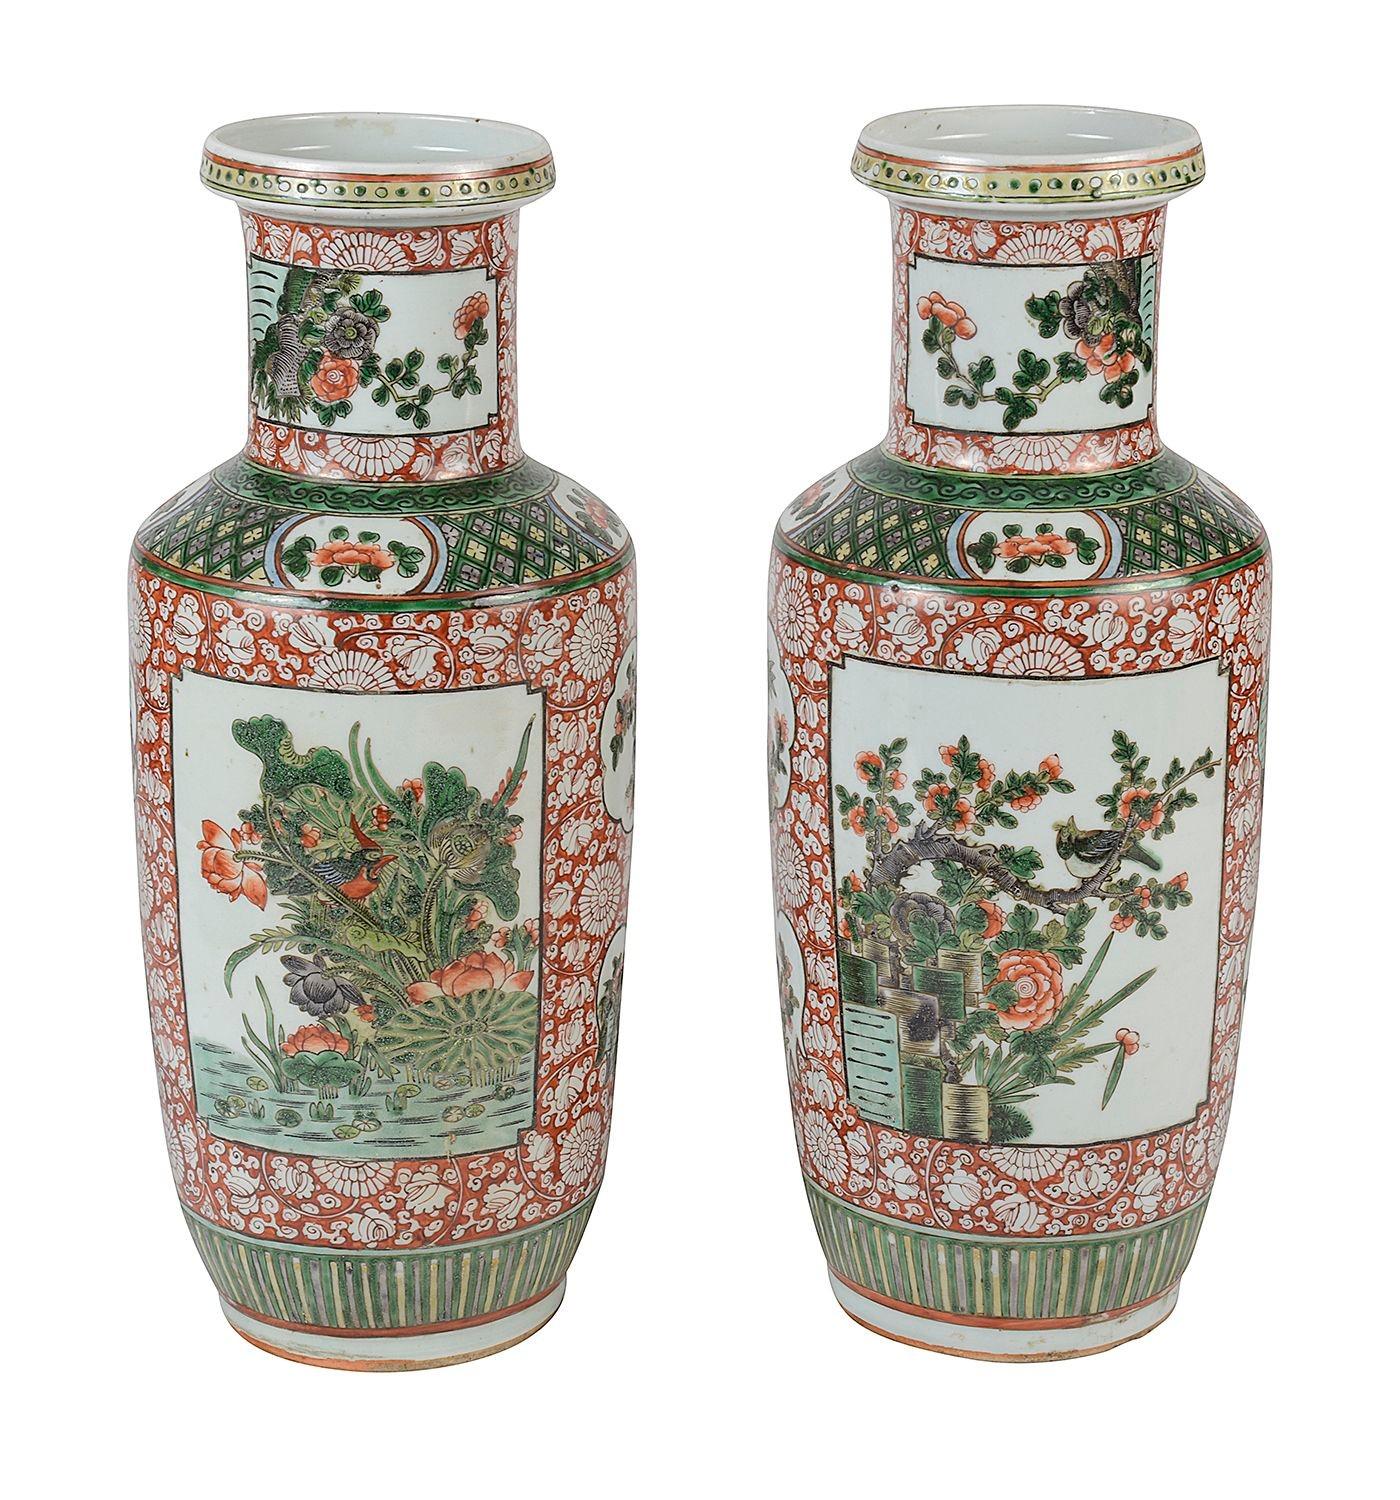 A good quality pair of late 19th Century Chinese Famille Verte porcelain vases / lamps. Each with a bold green and orange ground. Classical motif and scrolling foliate decoration.Inset hand painted panels depicting birds perched in blossom trees.
We